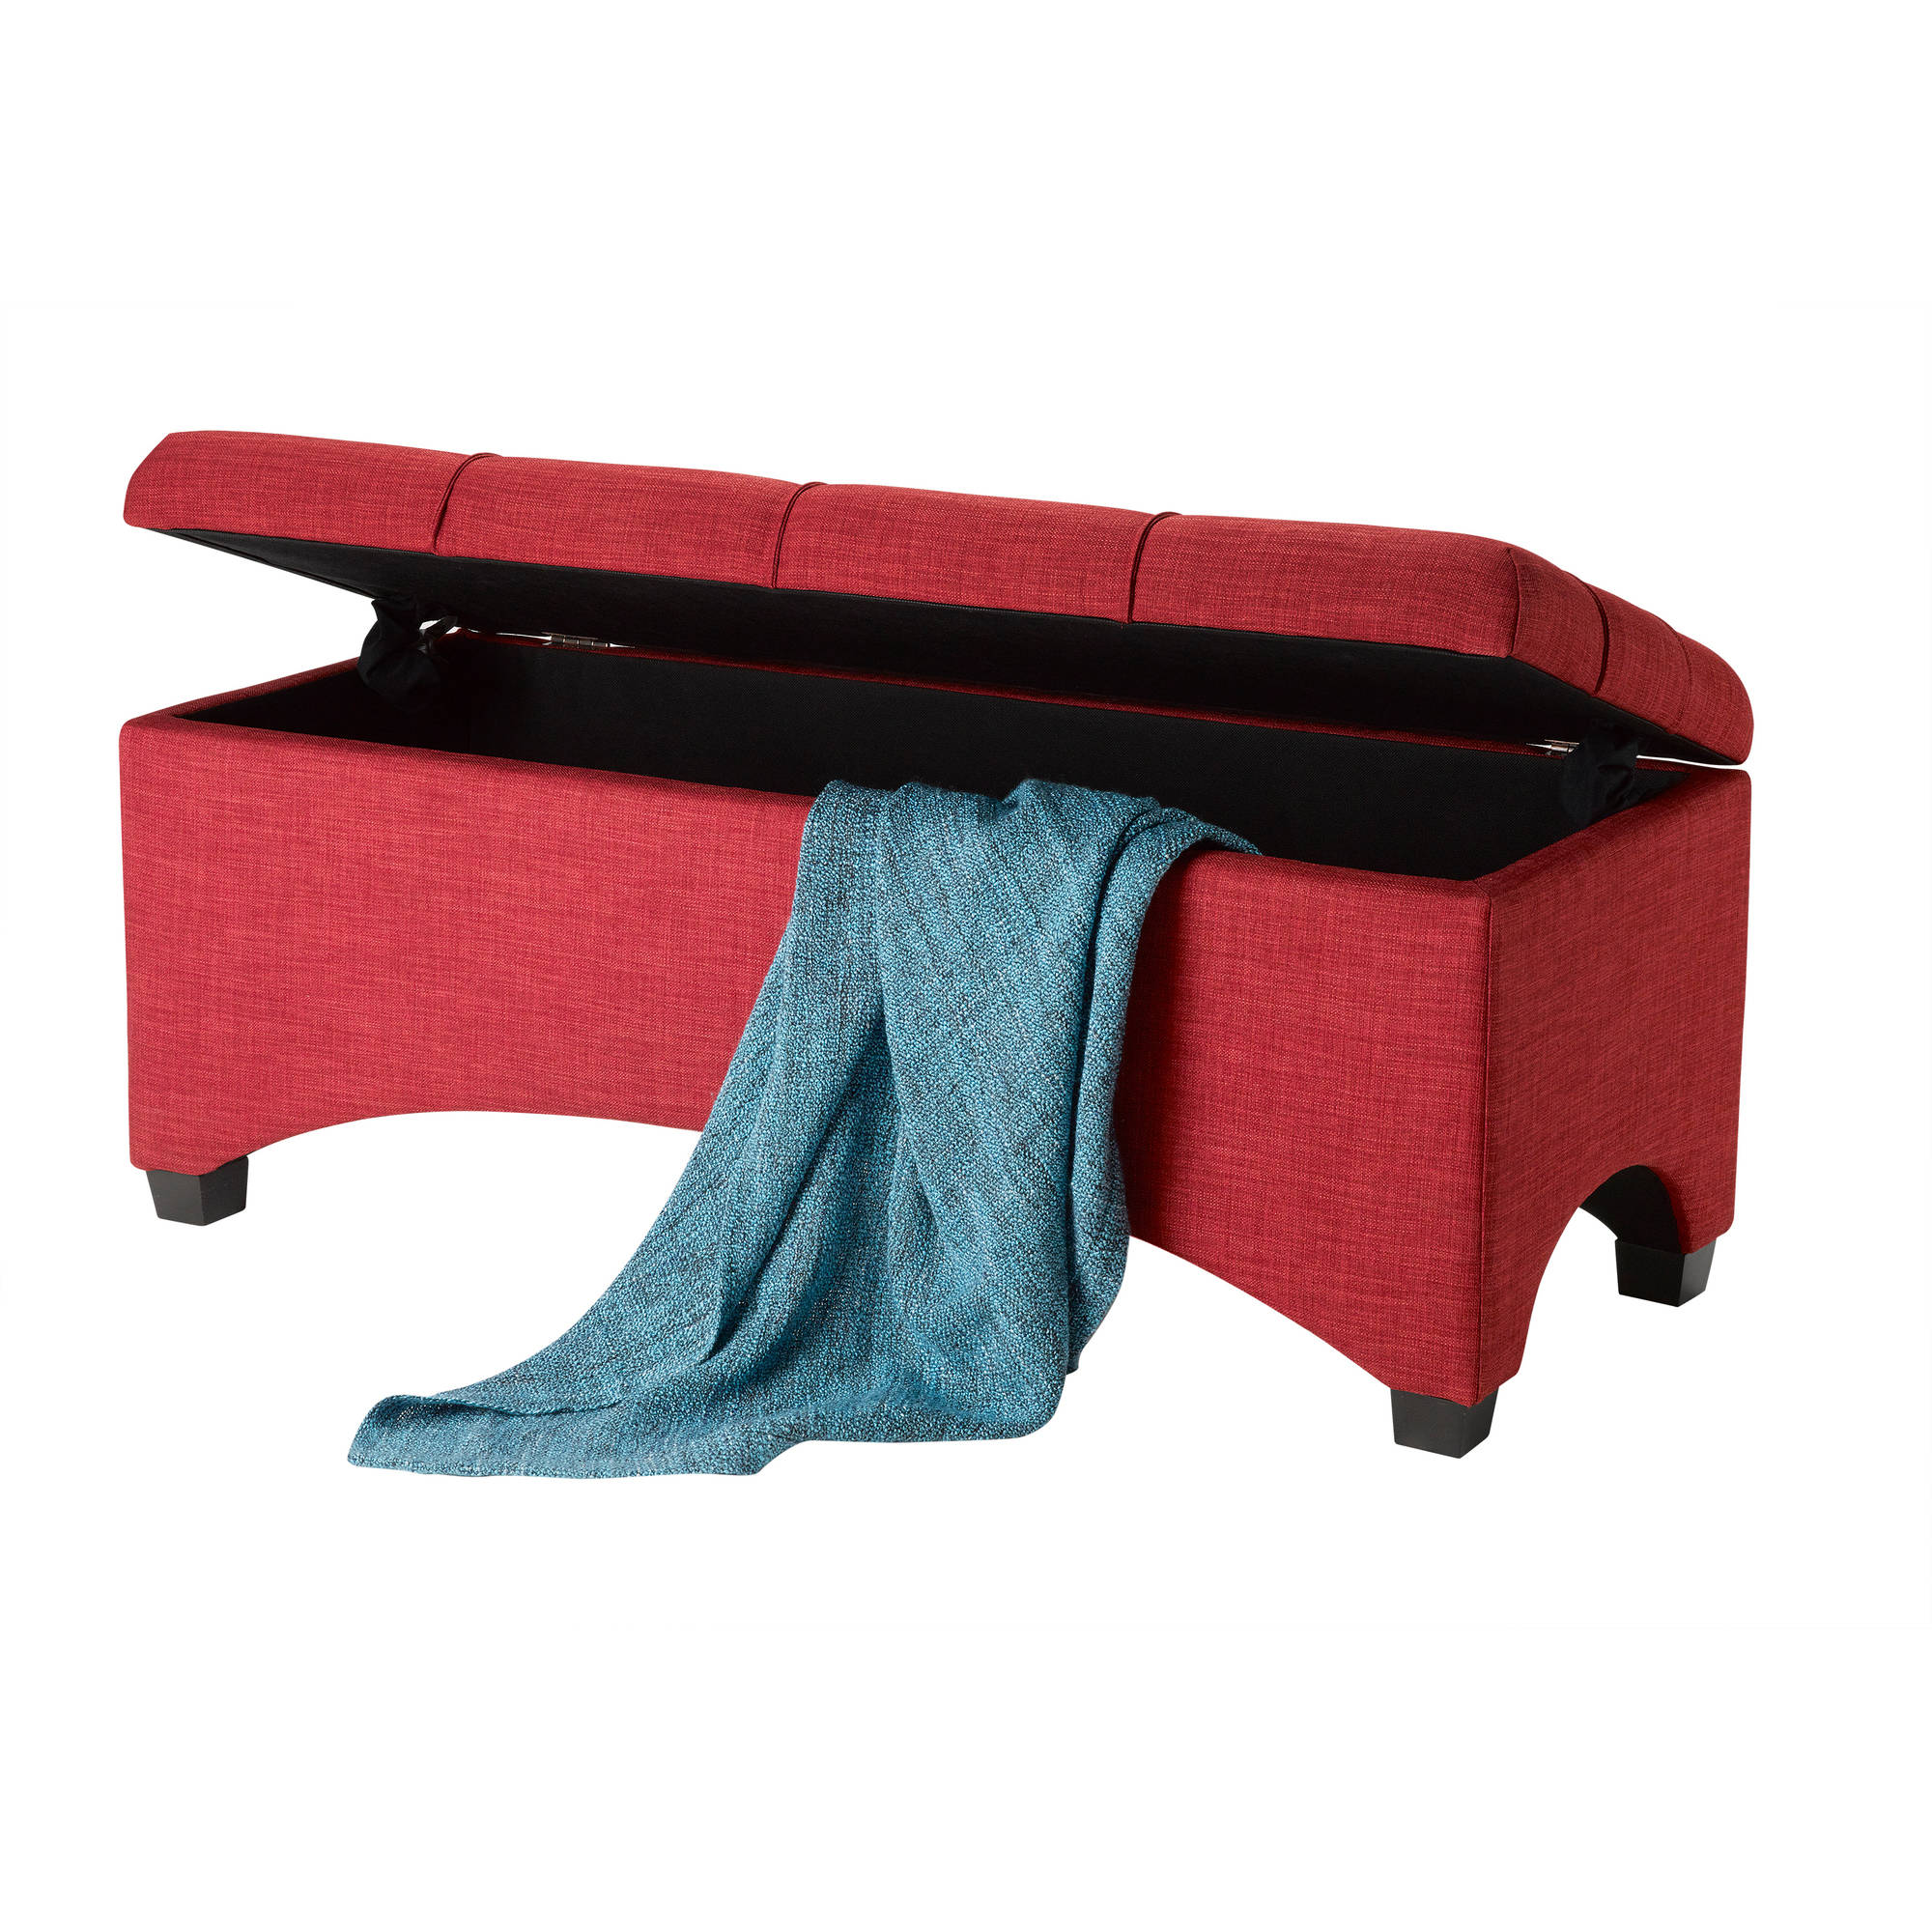 Better Homes & Gardens Pintucked Storage Bench, Red - image 4 of 5